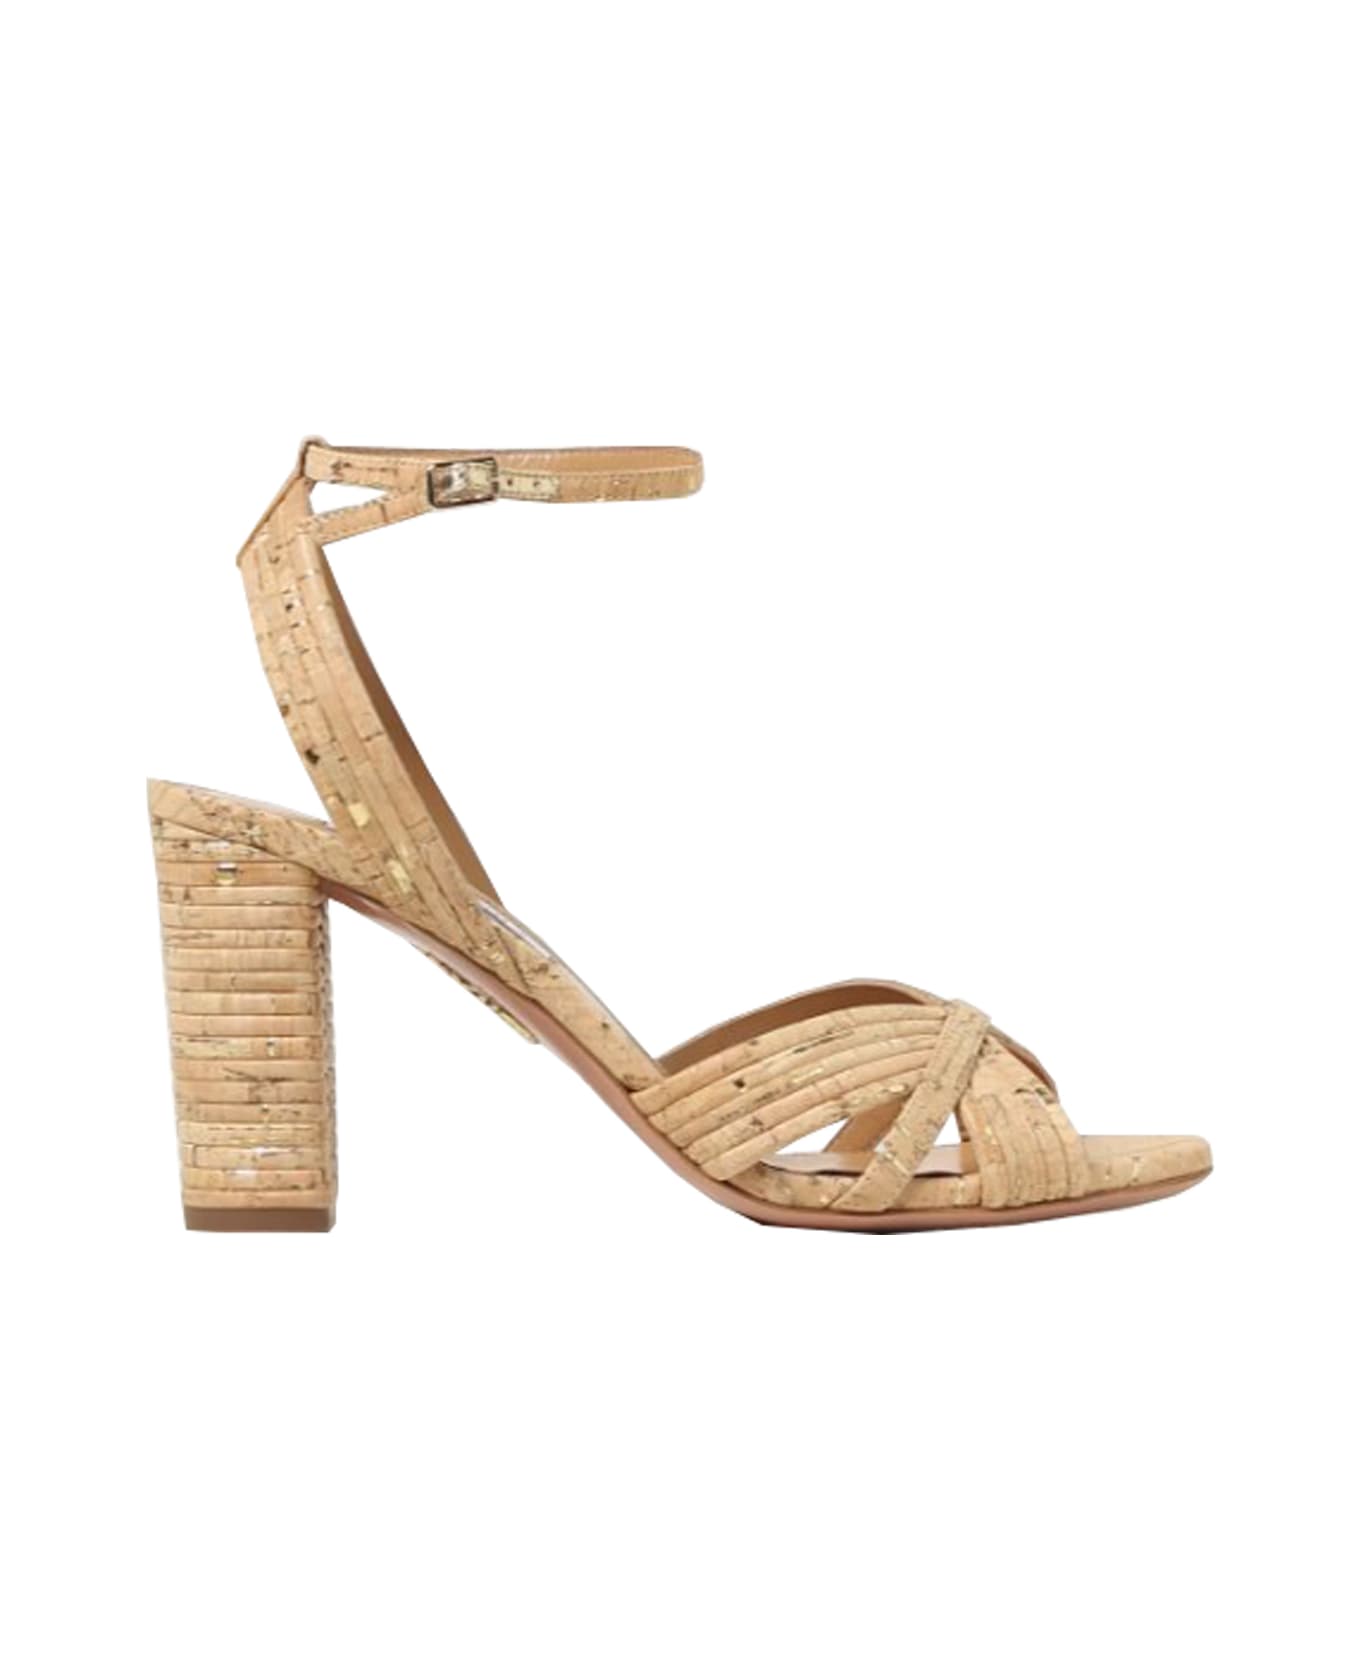 Aquazzura There Shoes With Heel - Golden